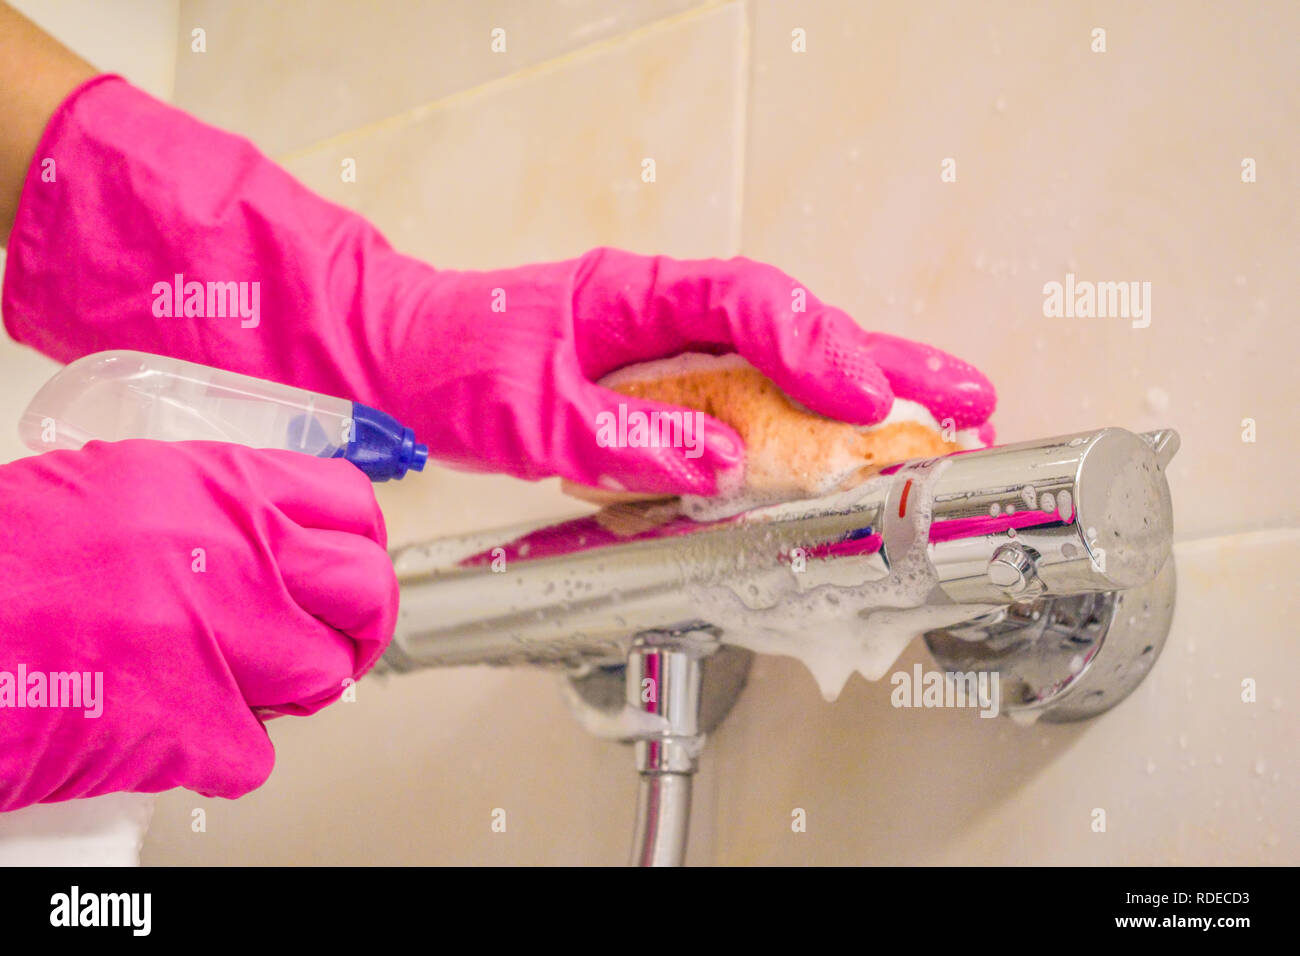 Hand of woman in pink rubber gloves cleaning bathtub shower mixer with spray detergent in bathroom Stock Photo